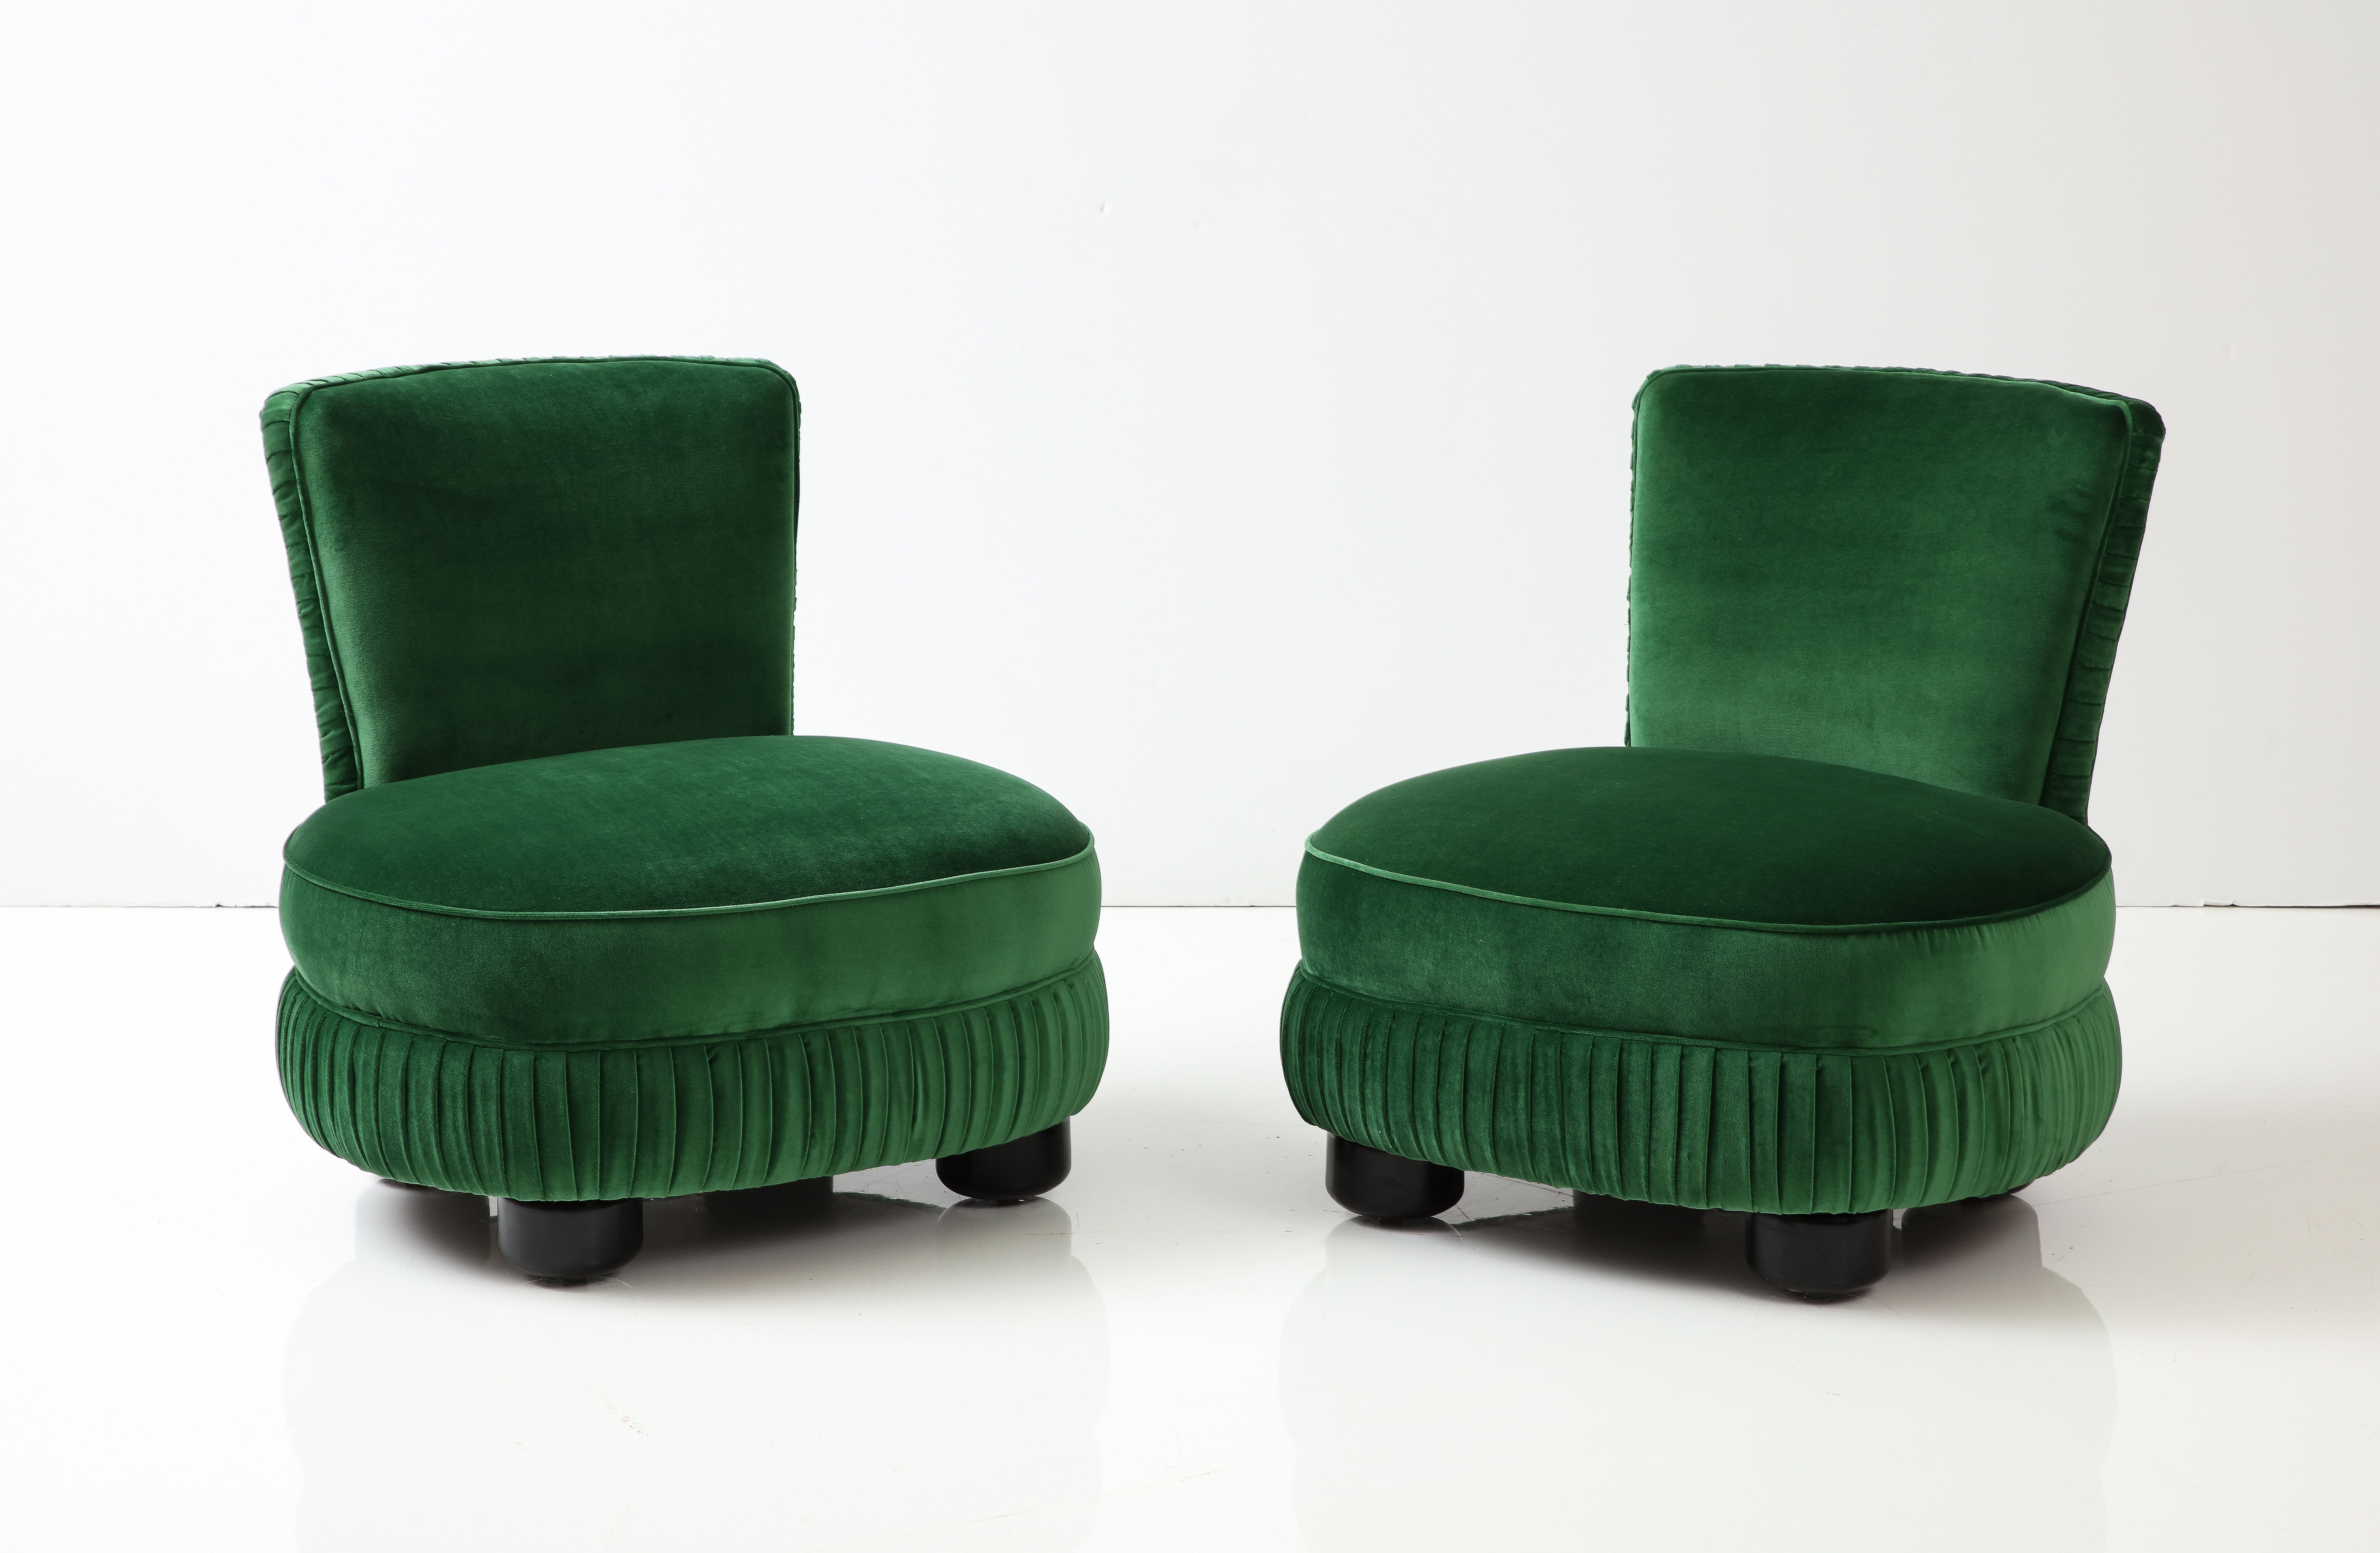 Amazing pair of sculptural Italian slipper chairs in green velvet upholstery, fully restored and re-upholstered in green velvet, with minor wear and patina due to age and use.